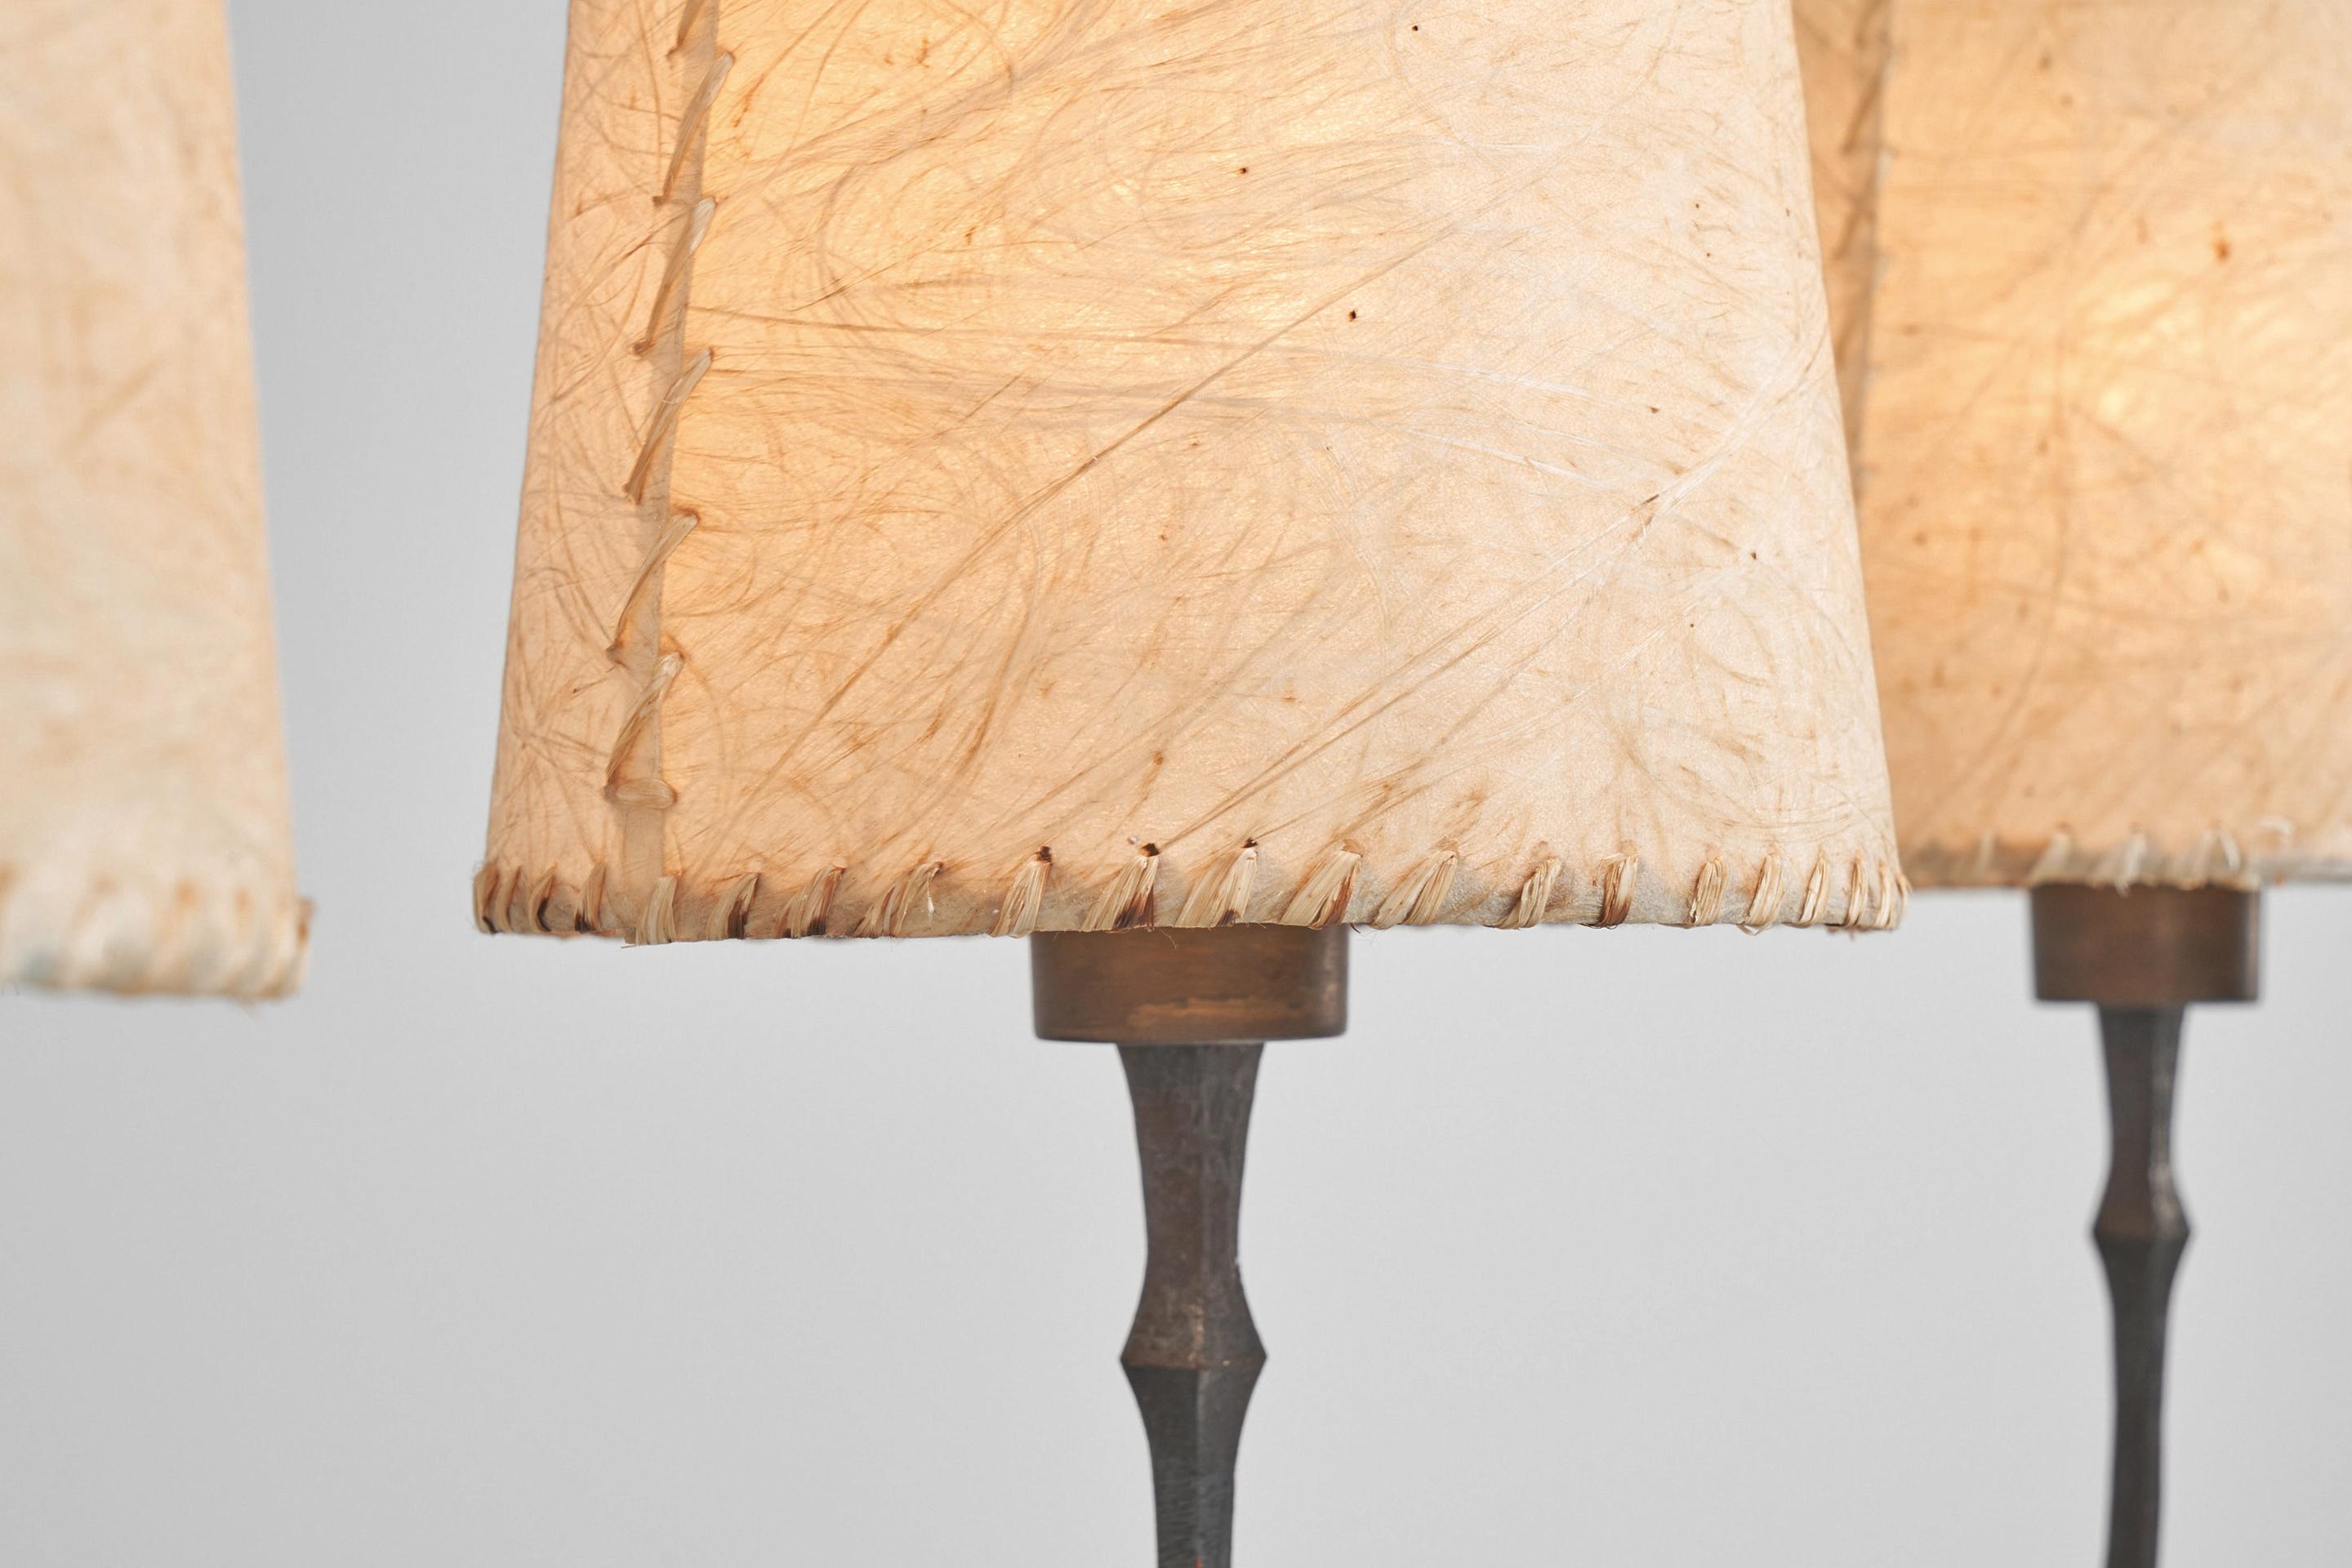 European Wrought Iron Floor Lamp Made in France, 1950s